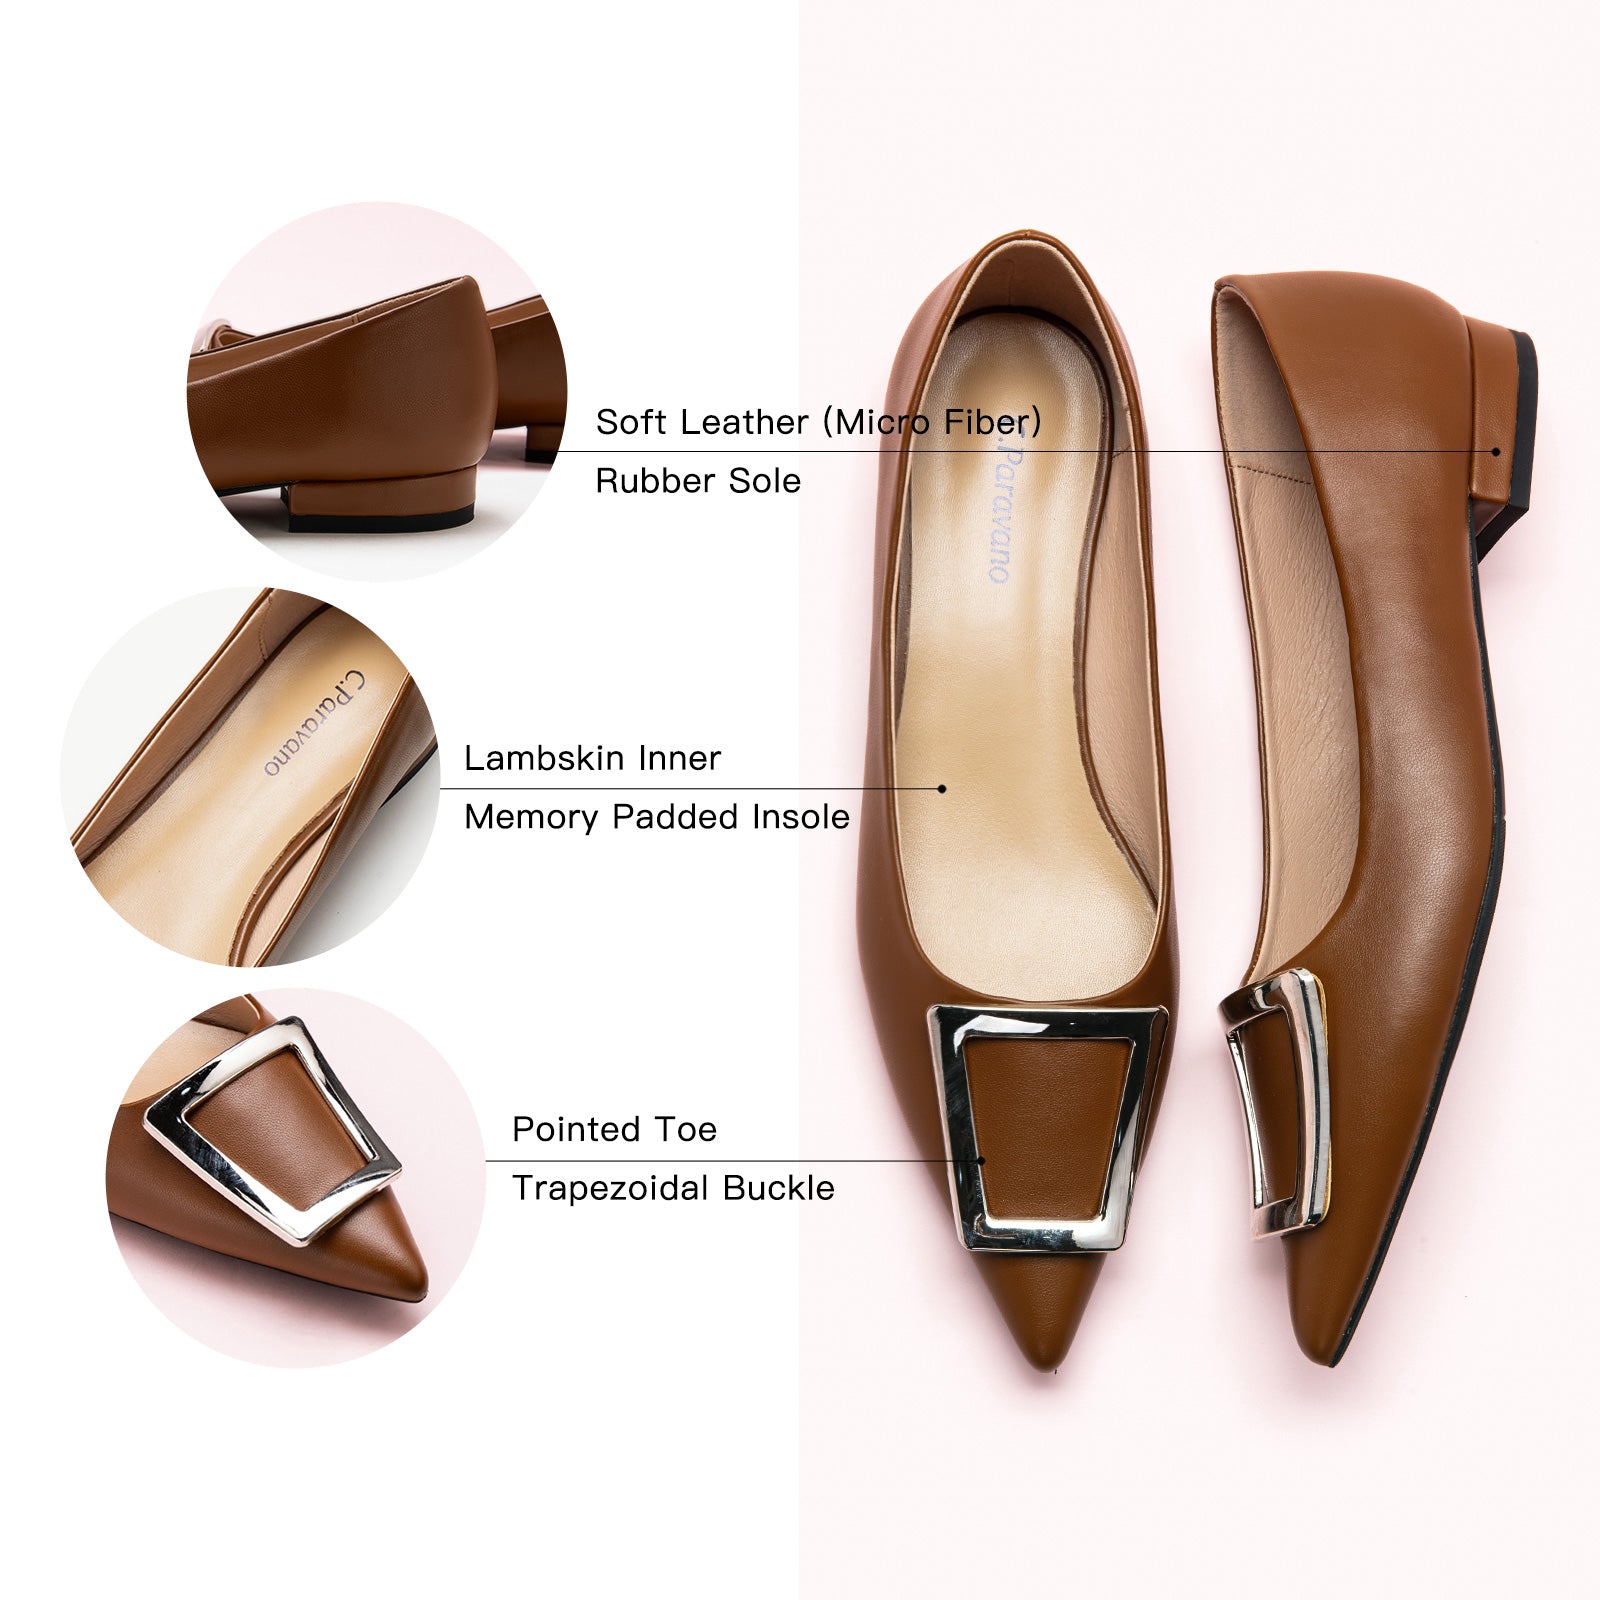 Trapezoidal Buckle Flats in Brown, a warm and versatile choice for adding a touch of natural charm to your ensemble